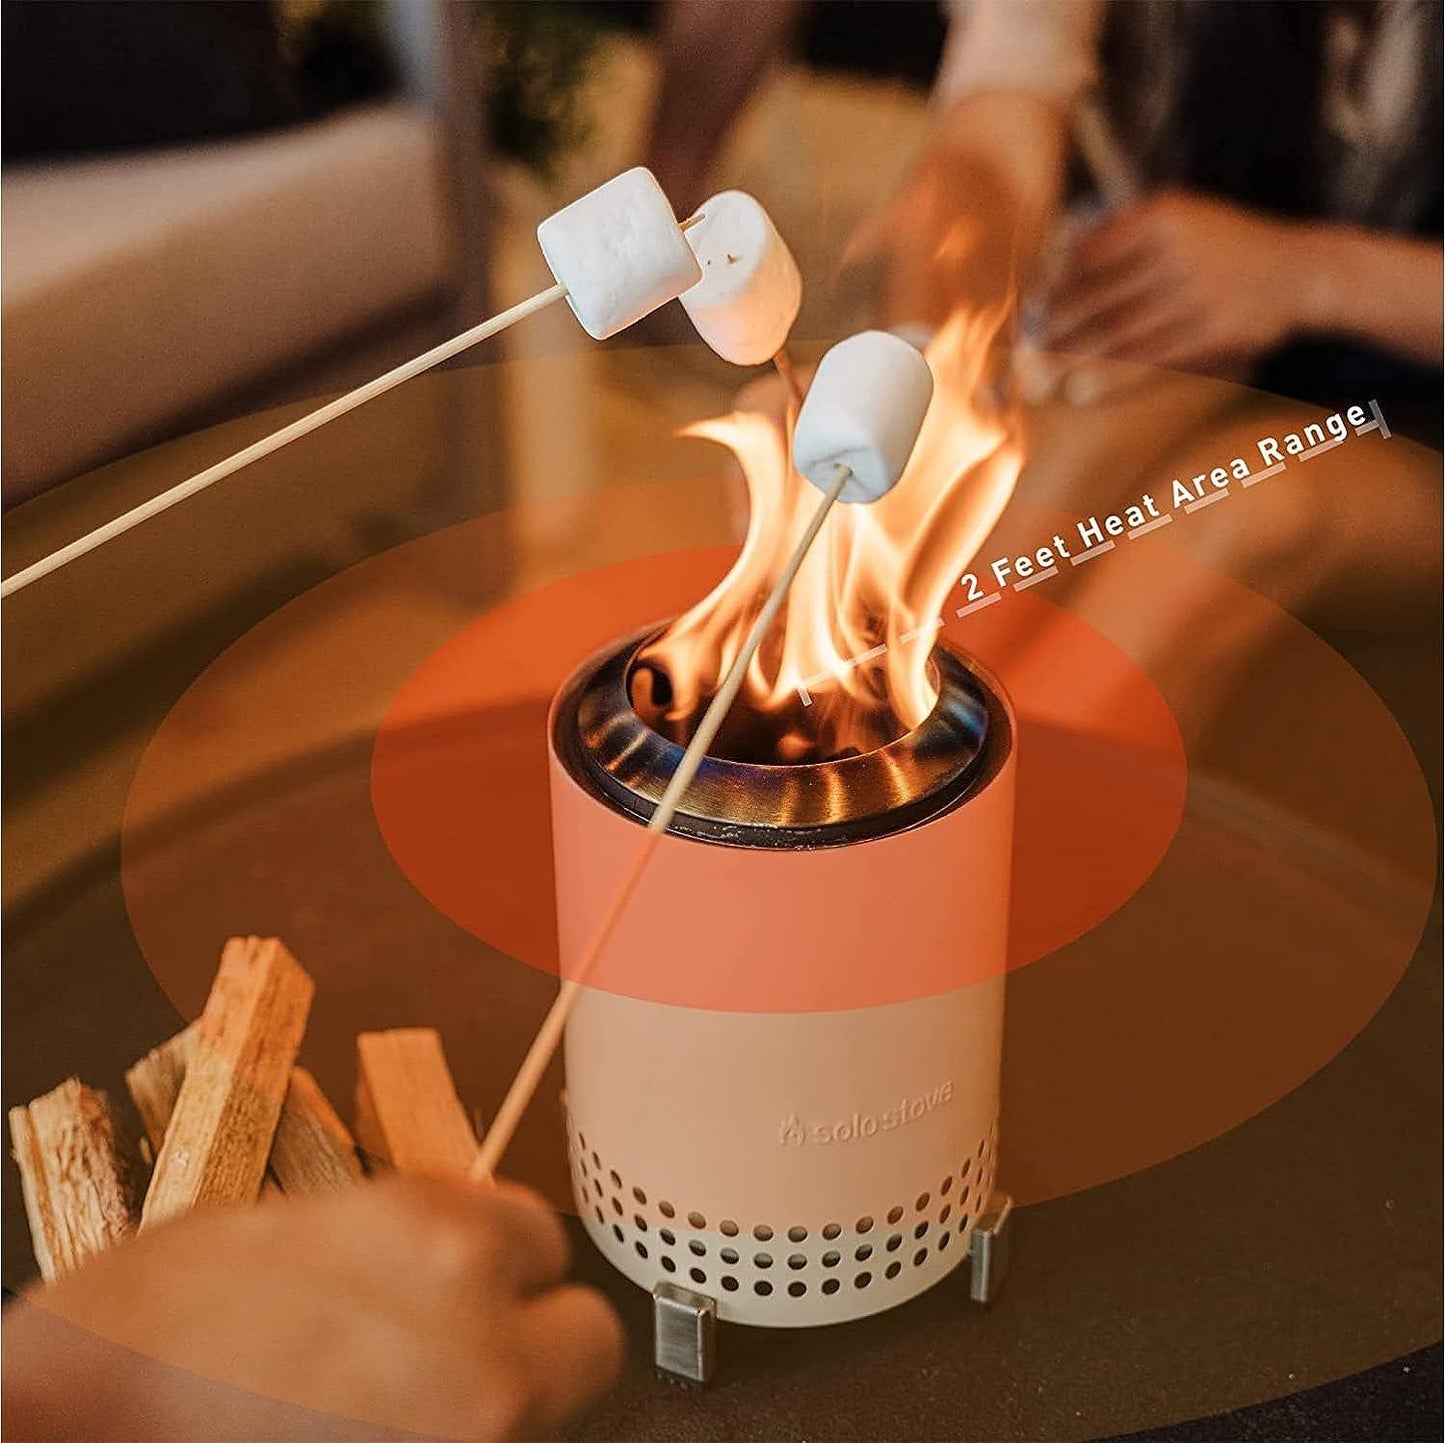 Solo Stove Mesa Tabletop Fire Pit with Stand | Low Smoke Outdoor Mini Fire for Urban & Suburbs | Fueled by Pellets or Wood, Safe Burning, Stainless Steel, with Travel Bag, Various Colors - TRAPSKI, LLC